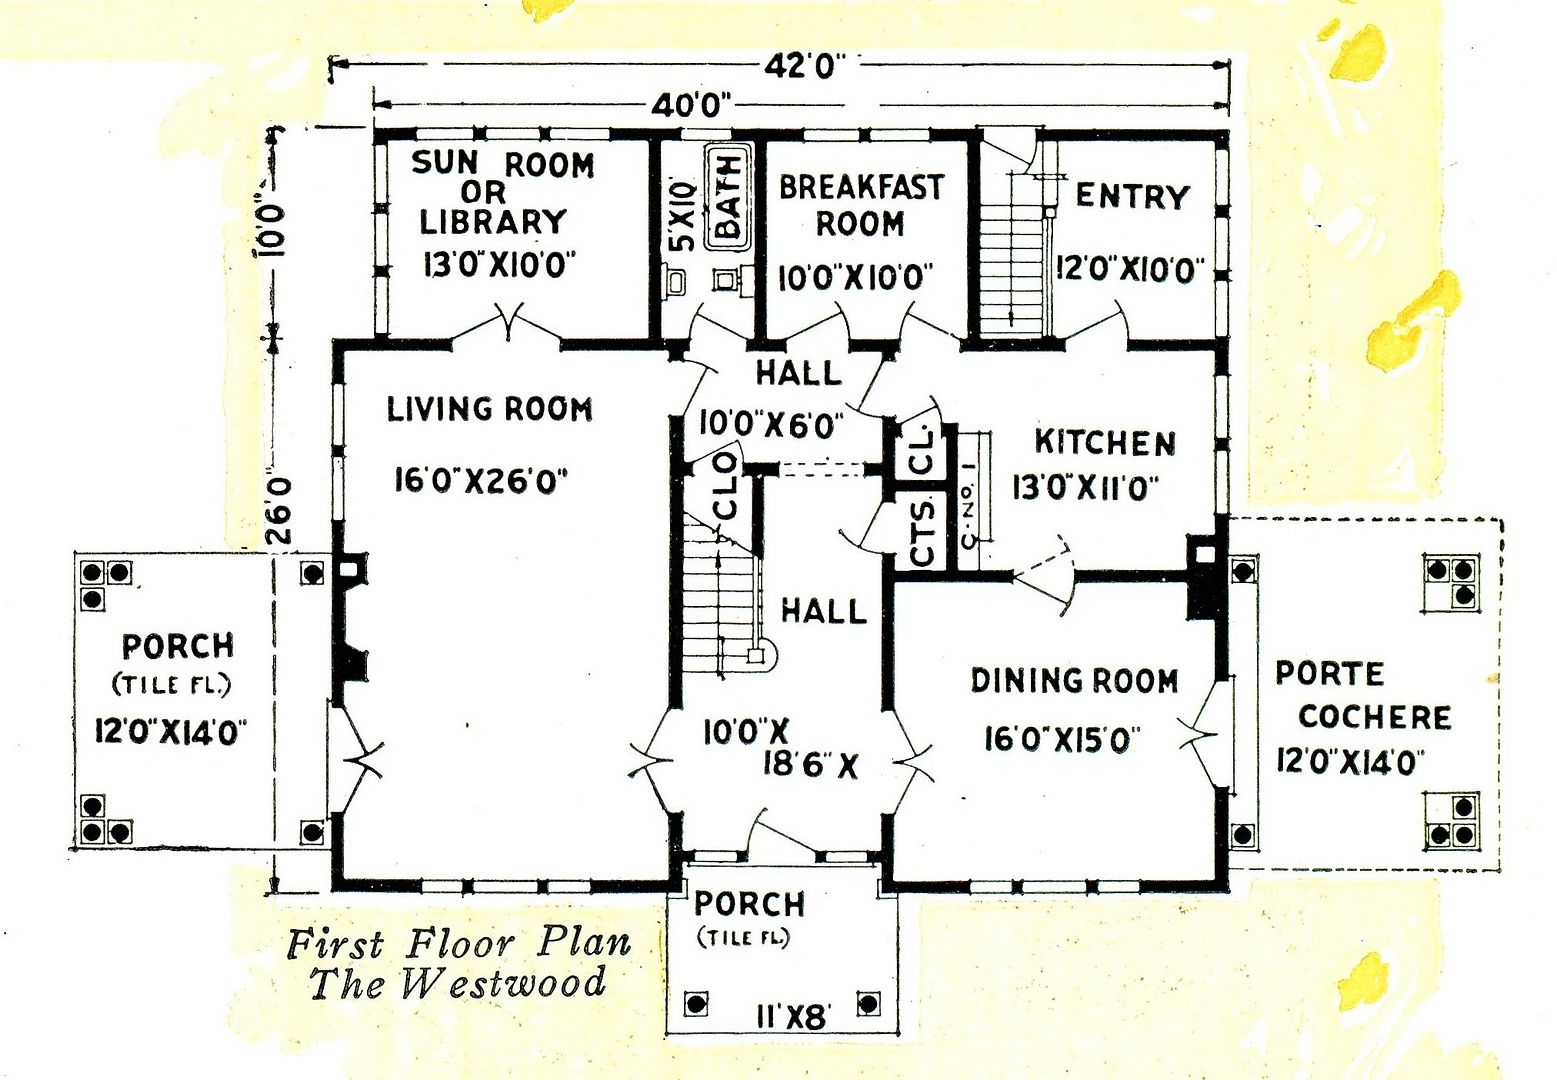 One of the best parts of playing with kit homes is studying the old floor plans. 